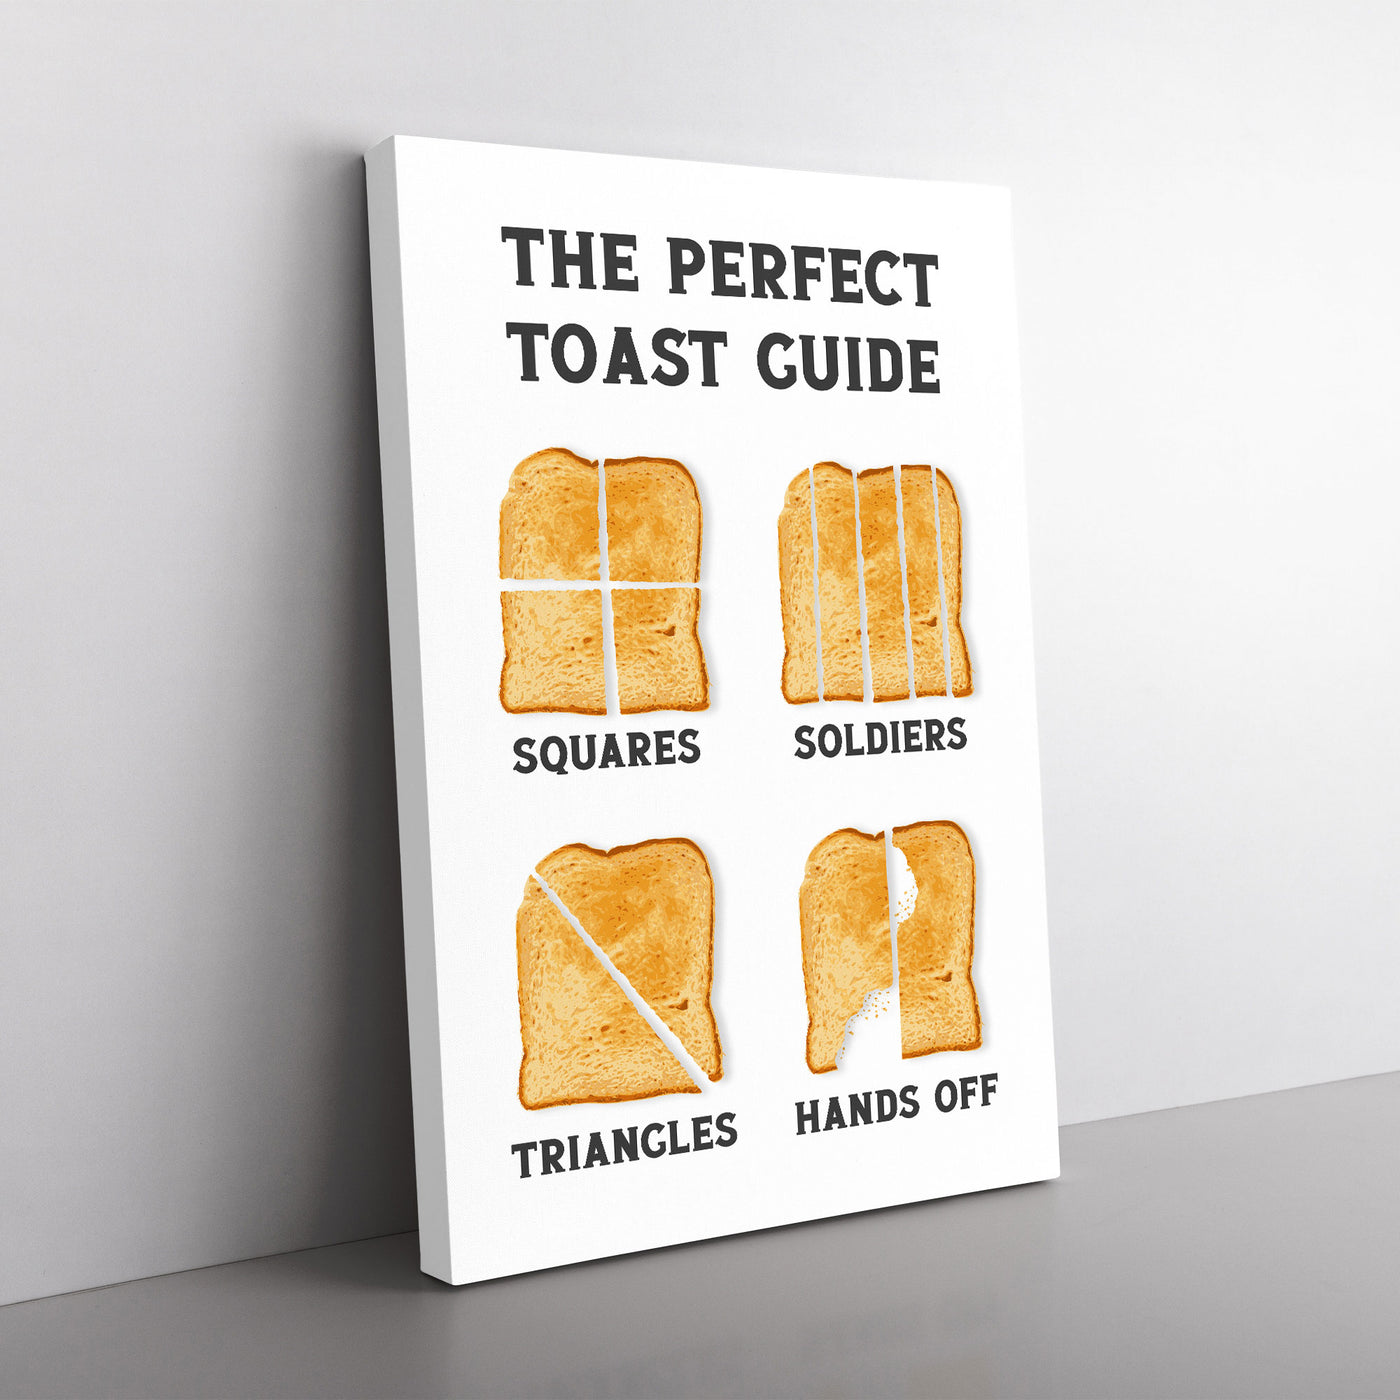 The Perfect Toast Guide